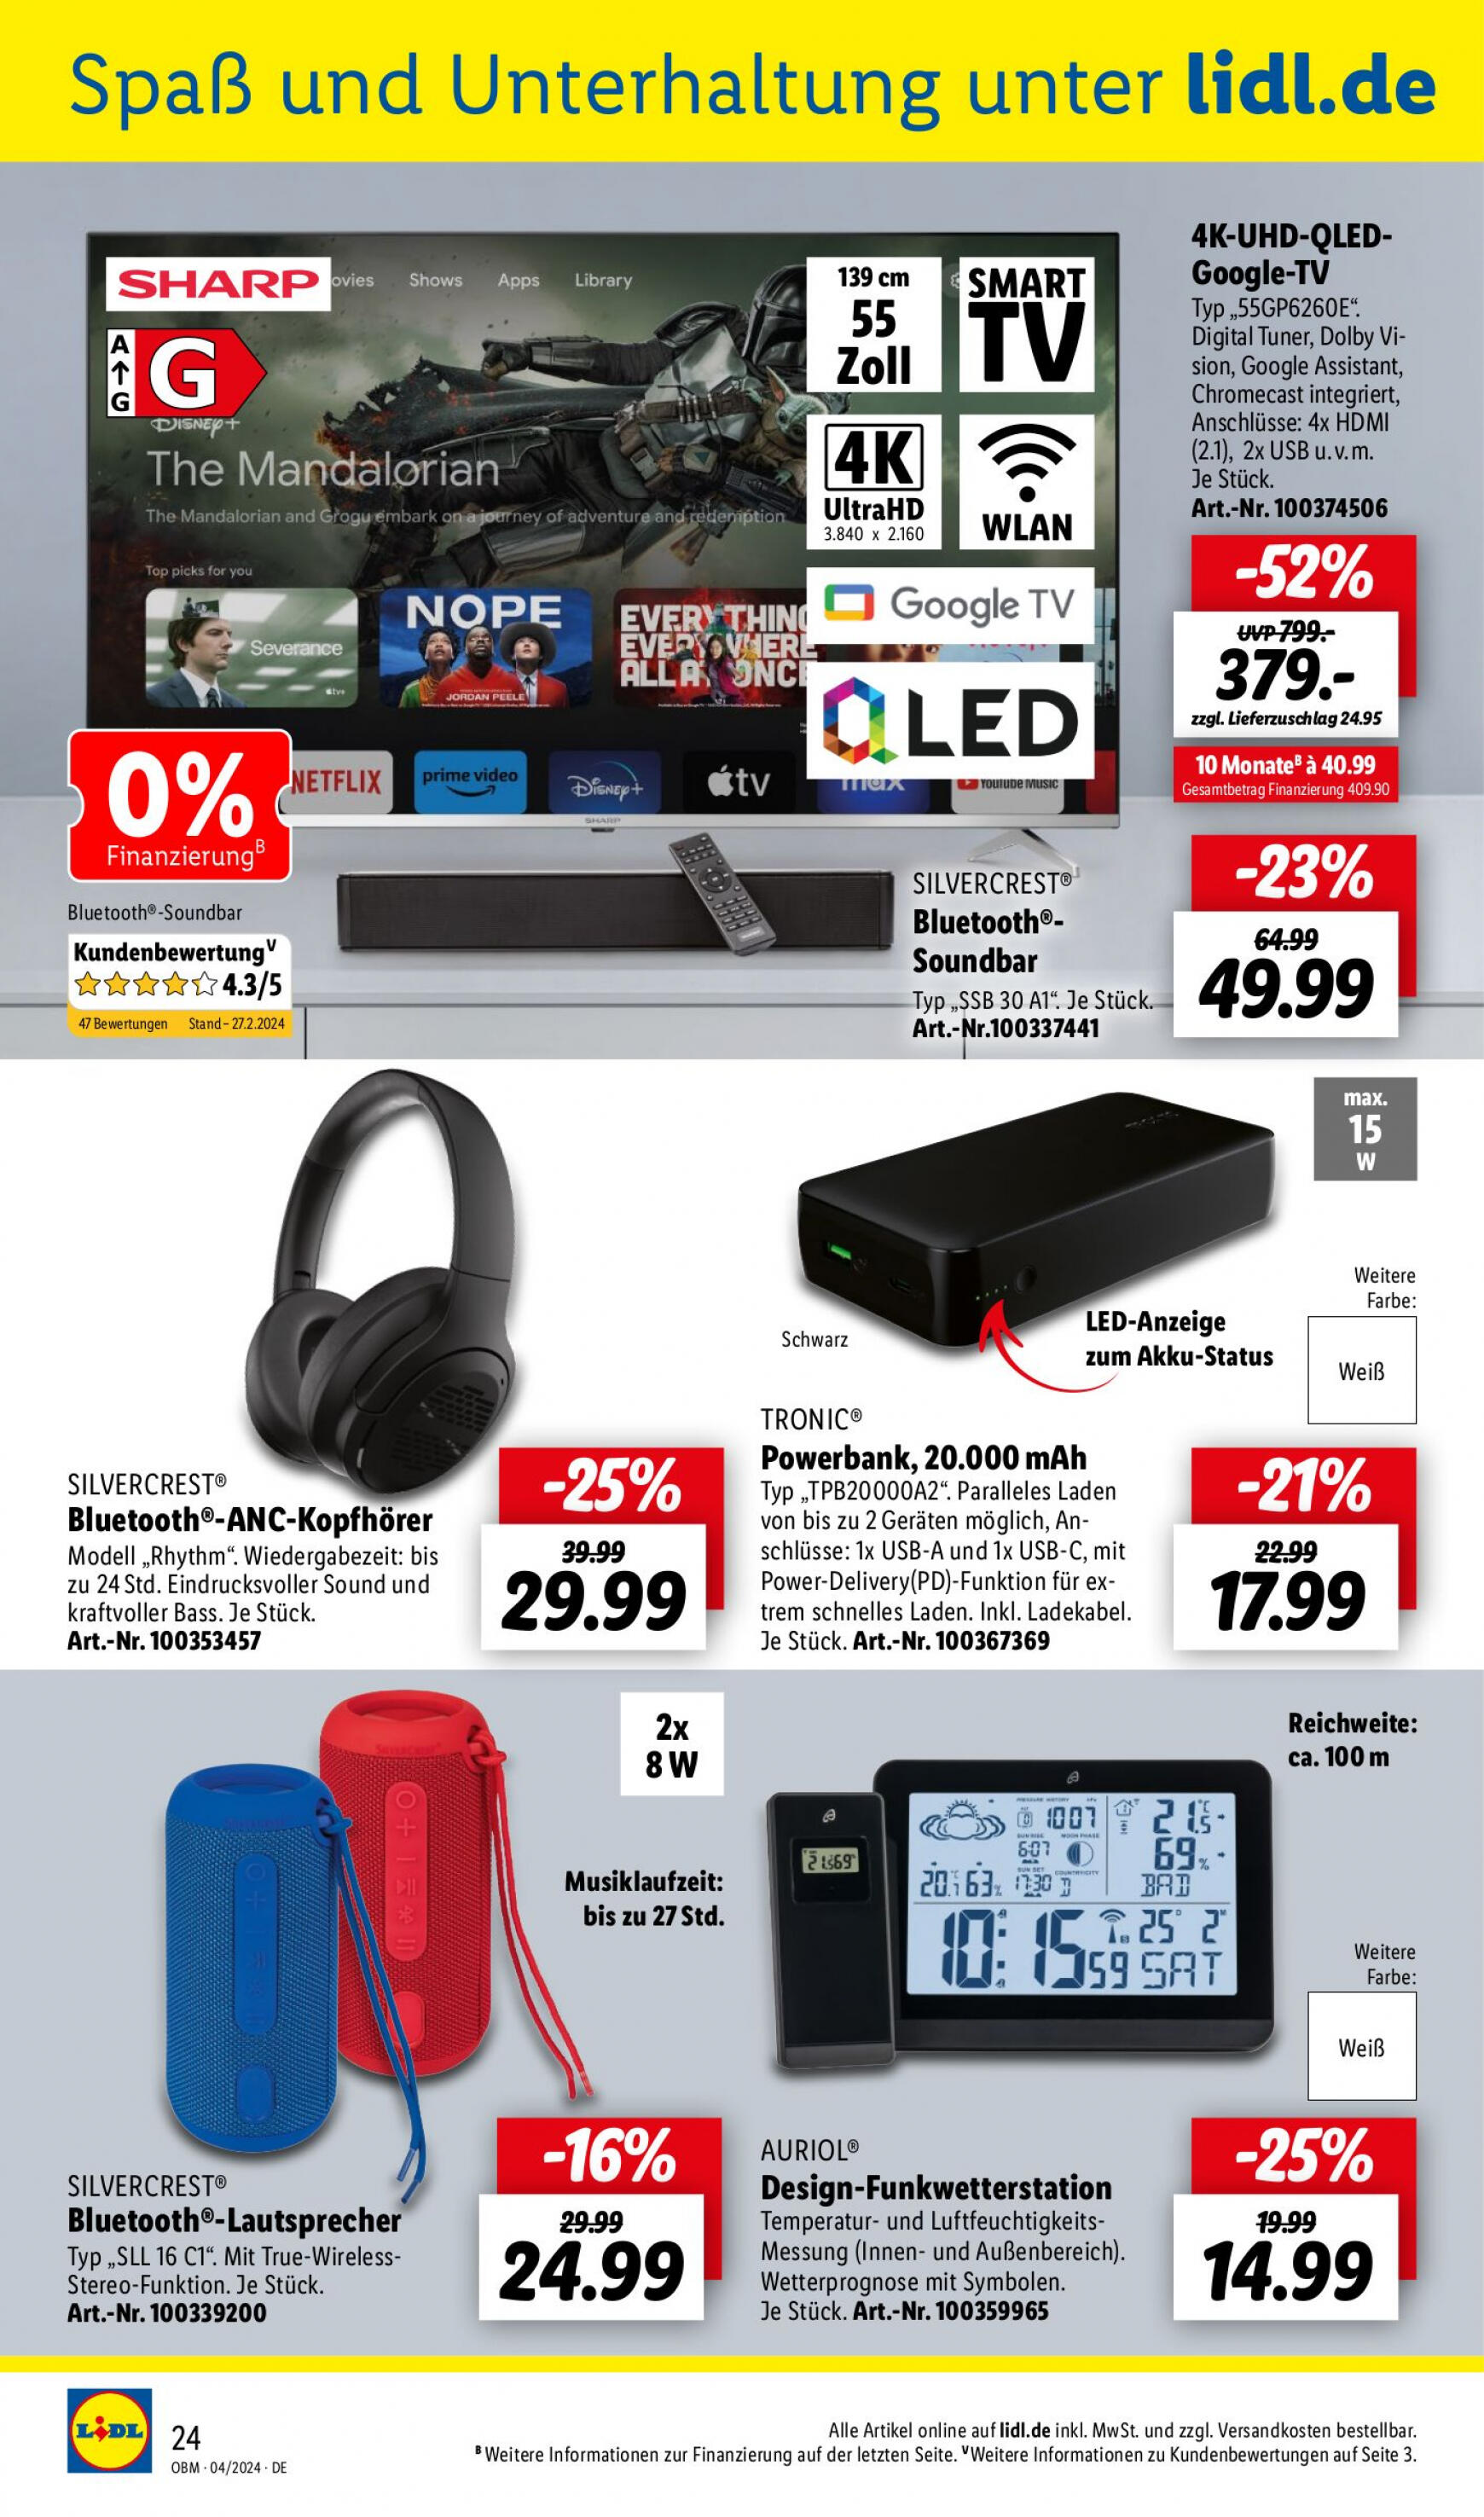 lidl - Flyer Lidl - Aktuelle Onlineshop-Highlights aktuell 01.04. - 30.04. - page: 24